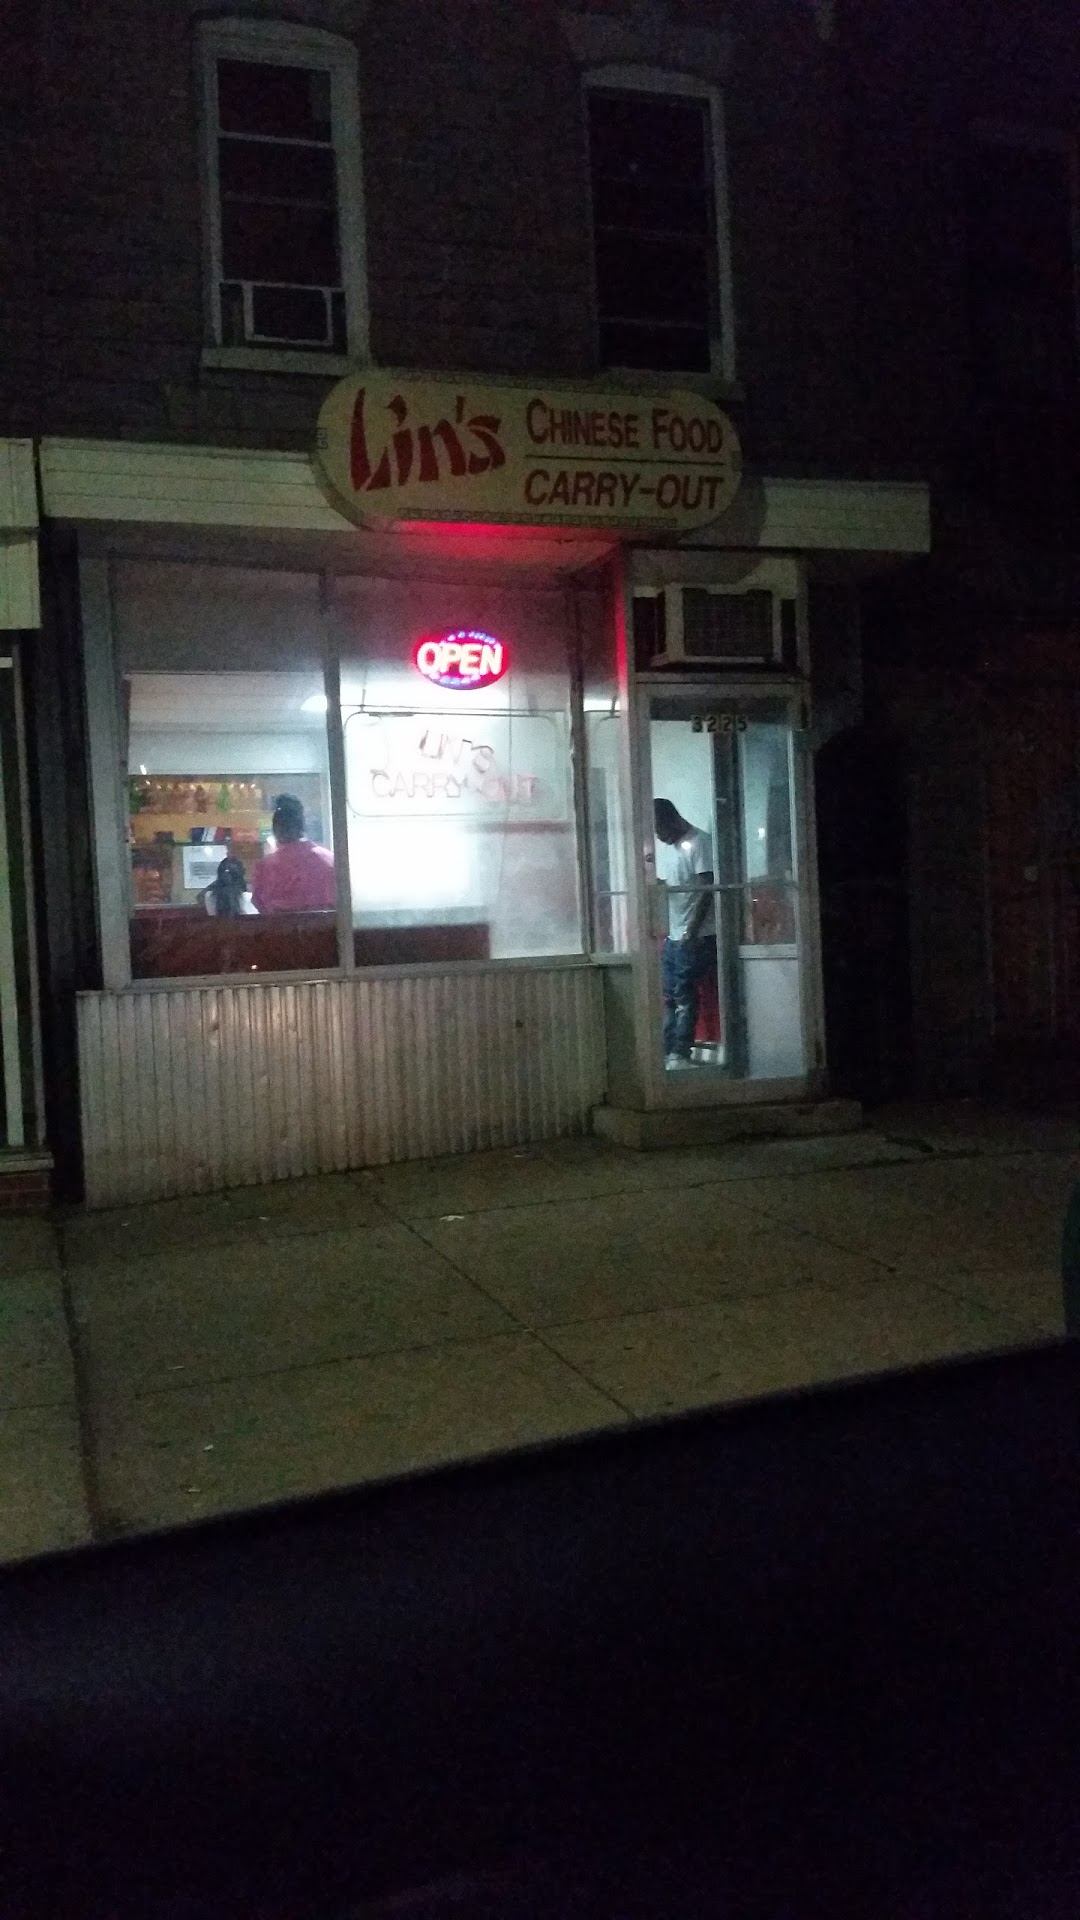 Lins Chinese Food Carry-Out